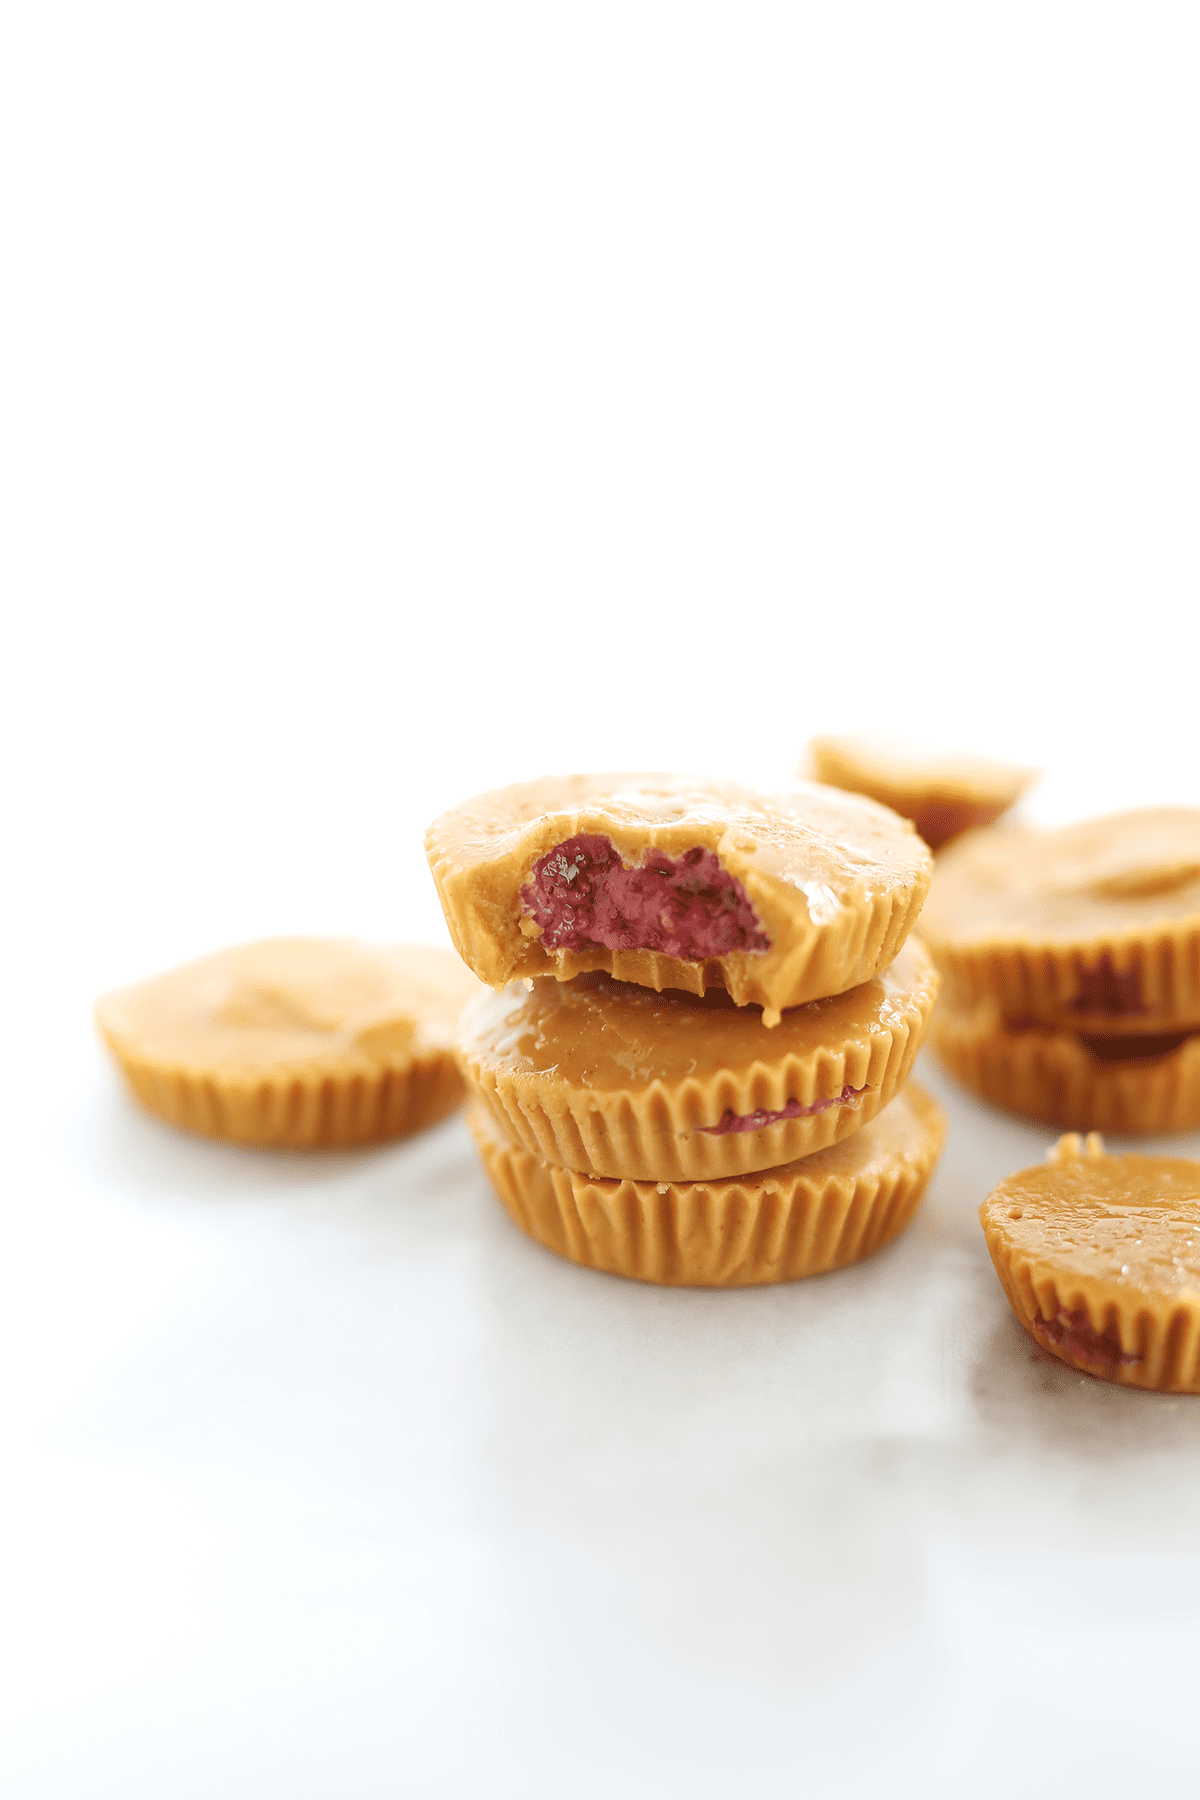 Peanut Butter and Jelly Cups are super sweet and indulgently rich and creamy! Reminiscent of a classic, the PB&J sandwich! Vegan and healthy-ish! 